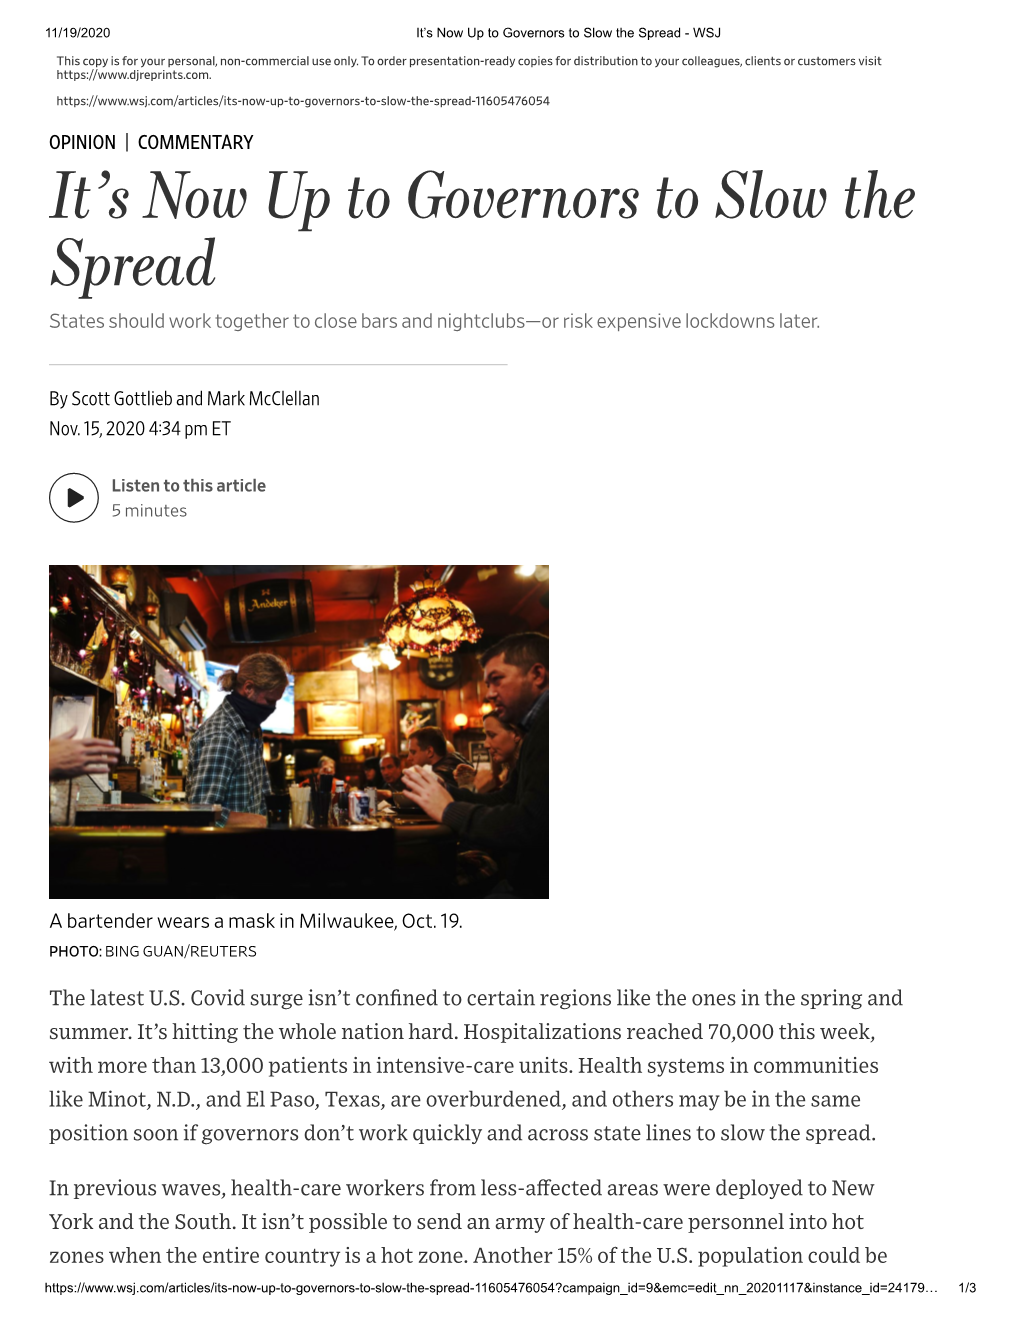 It's Now up to Governors to Slow the Spread